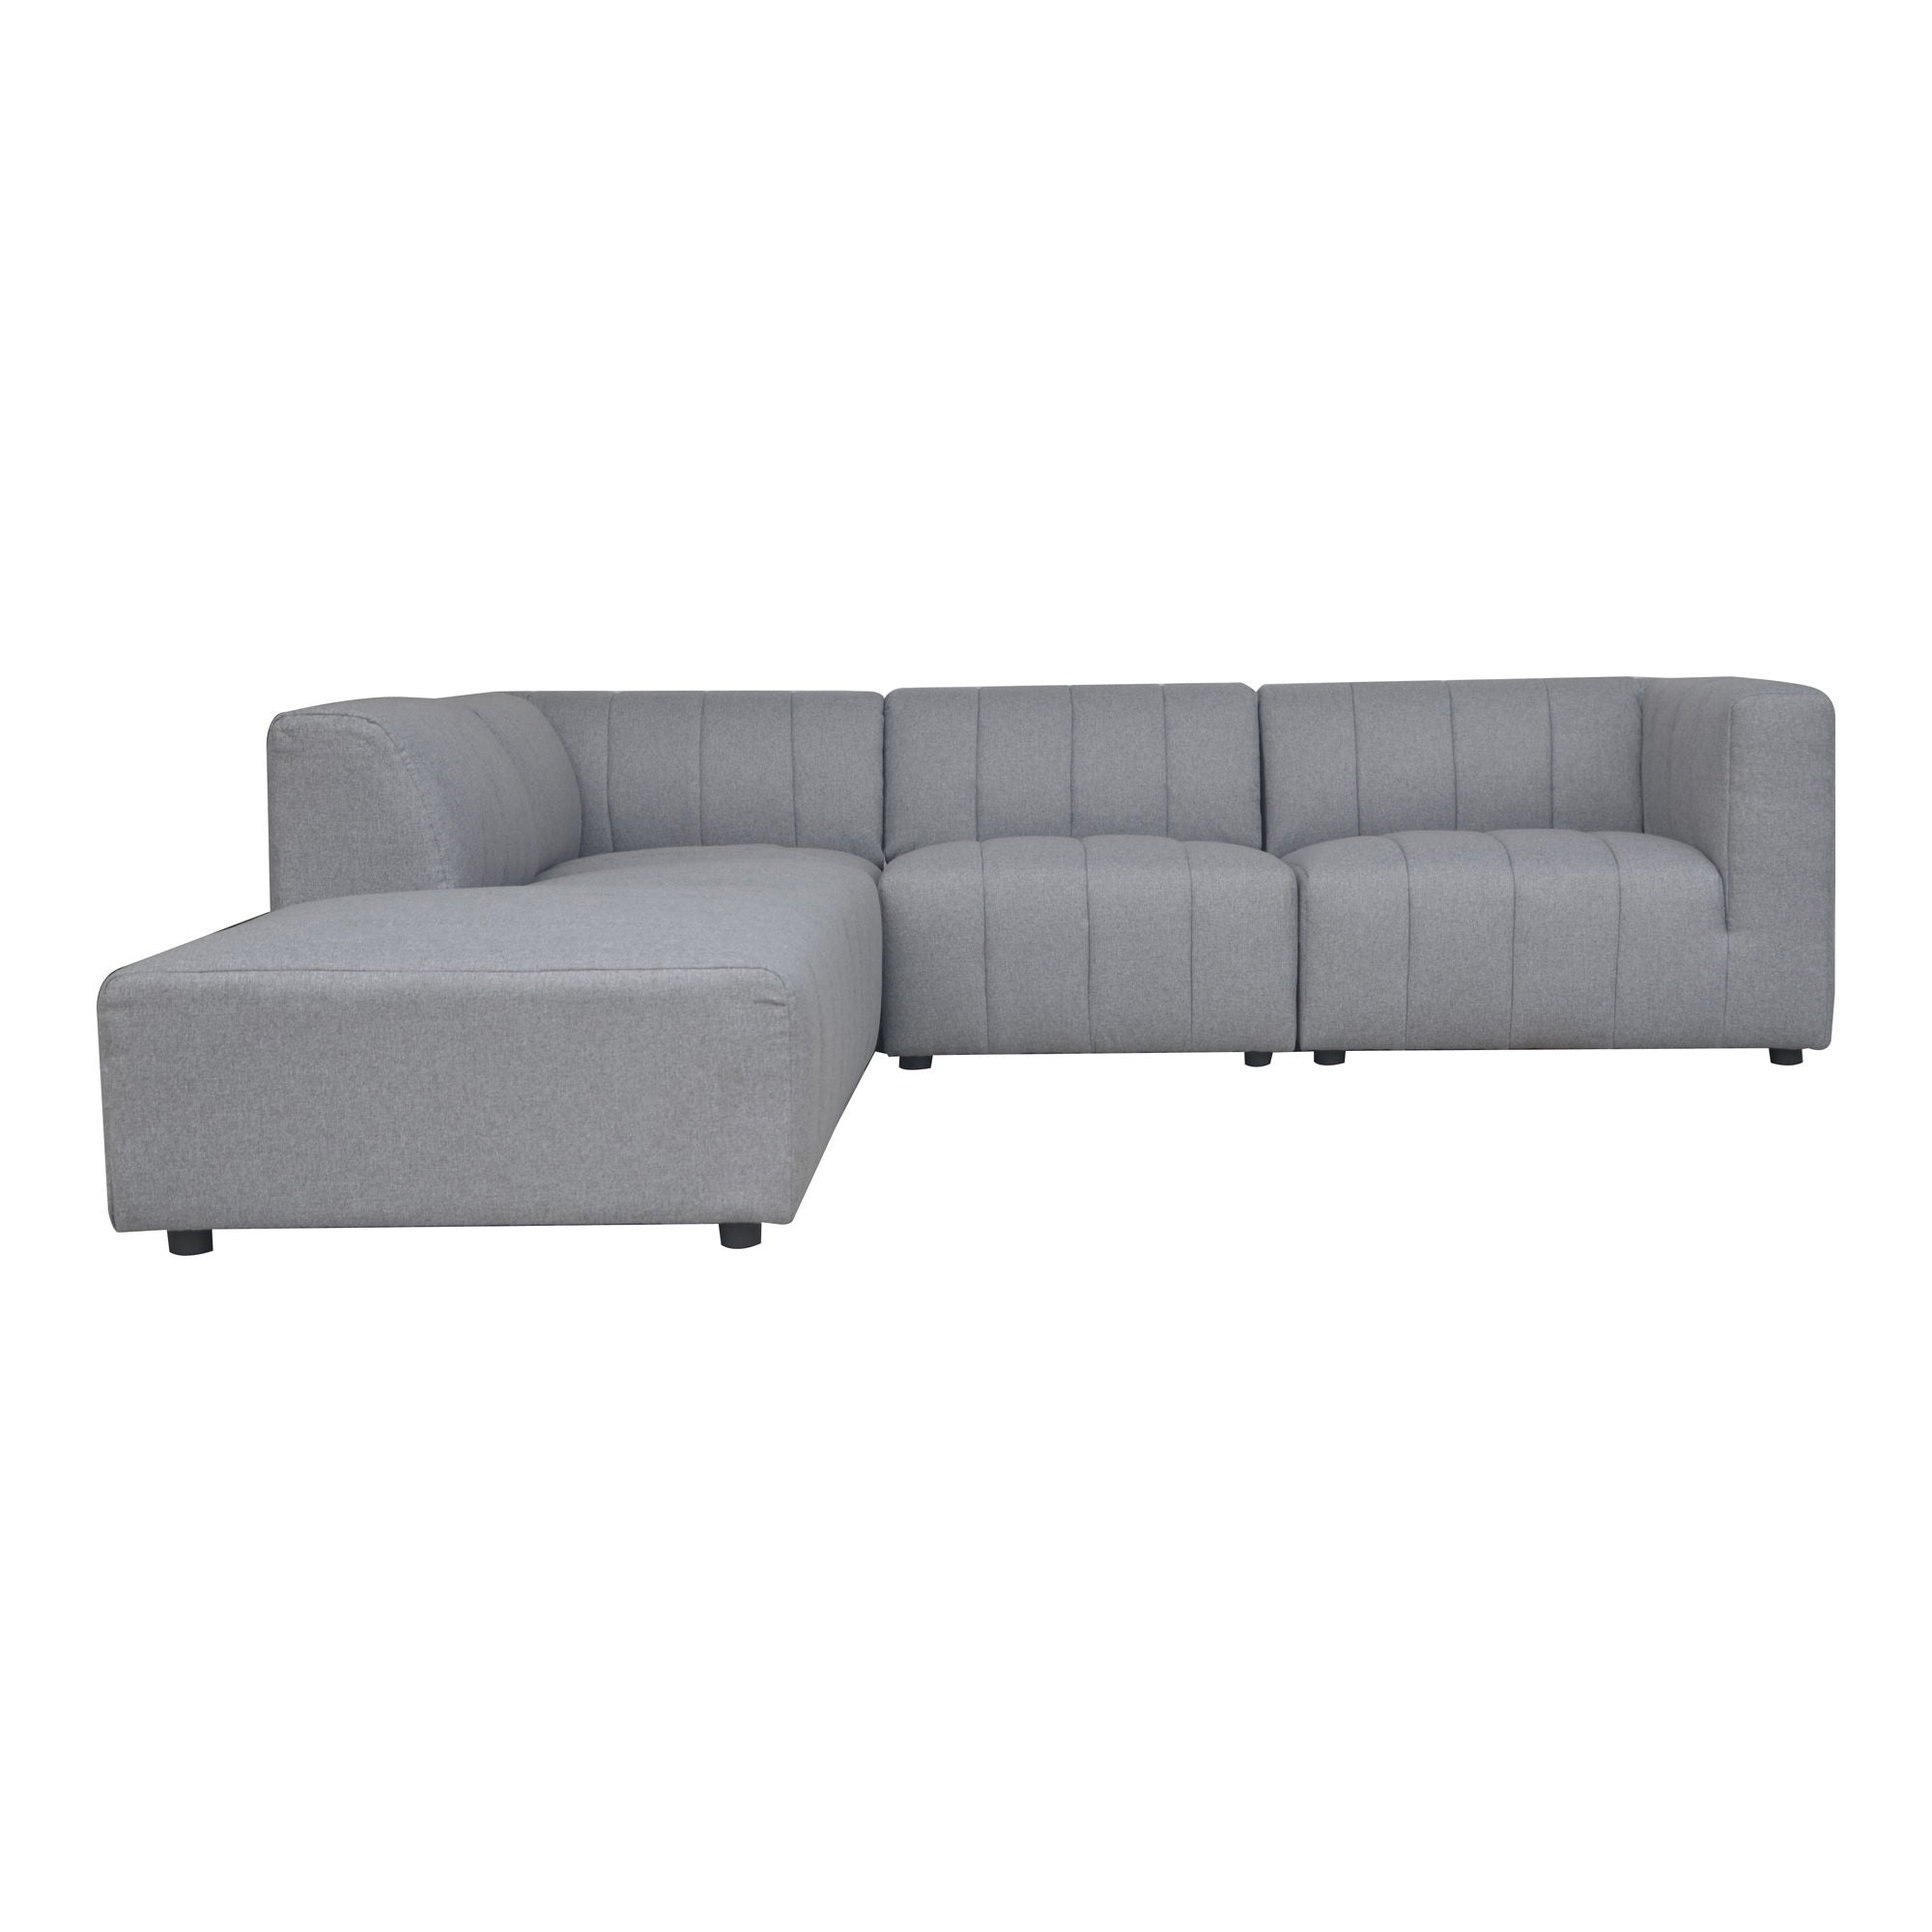 Lyric - Dream Modular Sectional Left Grey - Dark Gray-Stationary Sectionals-American Furniture Outlet